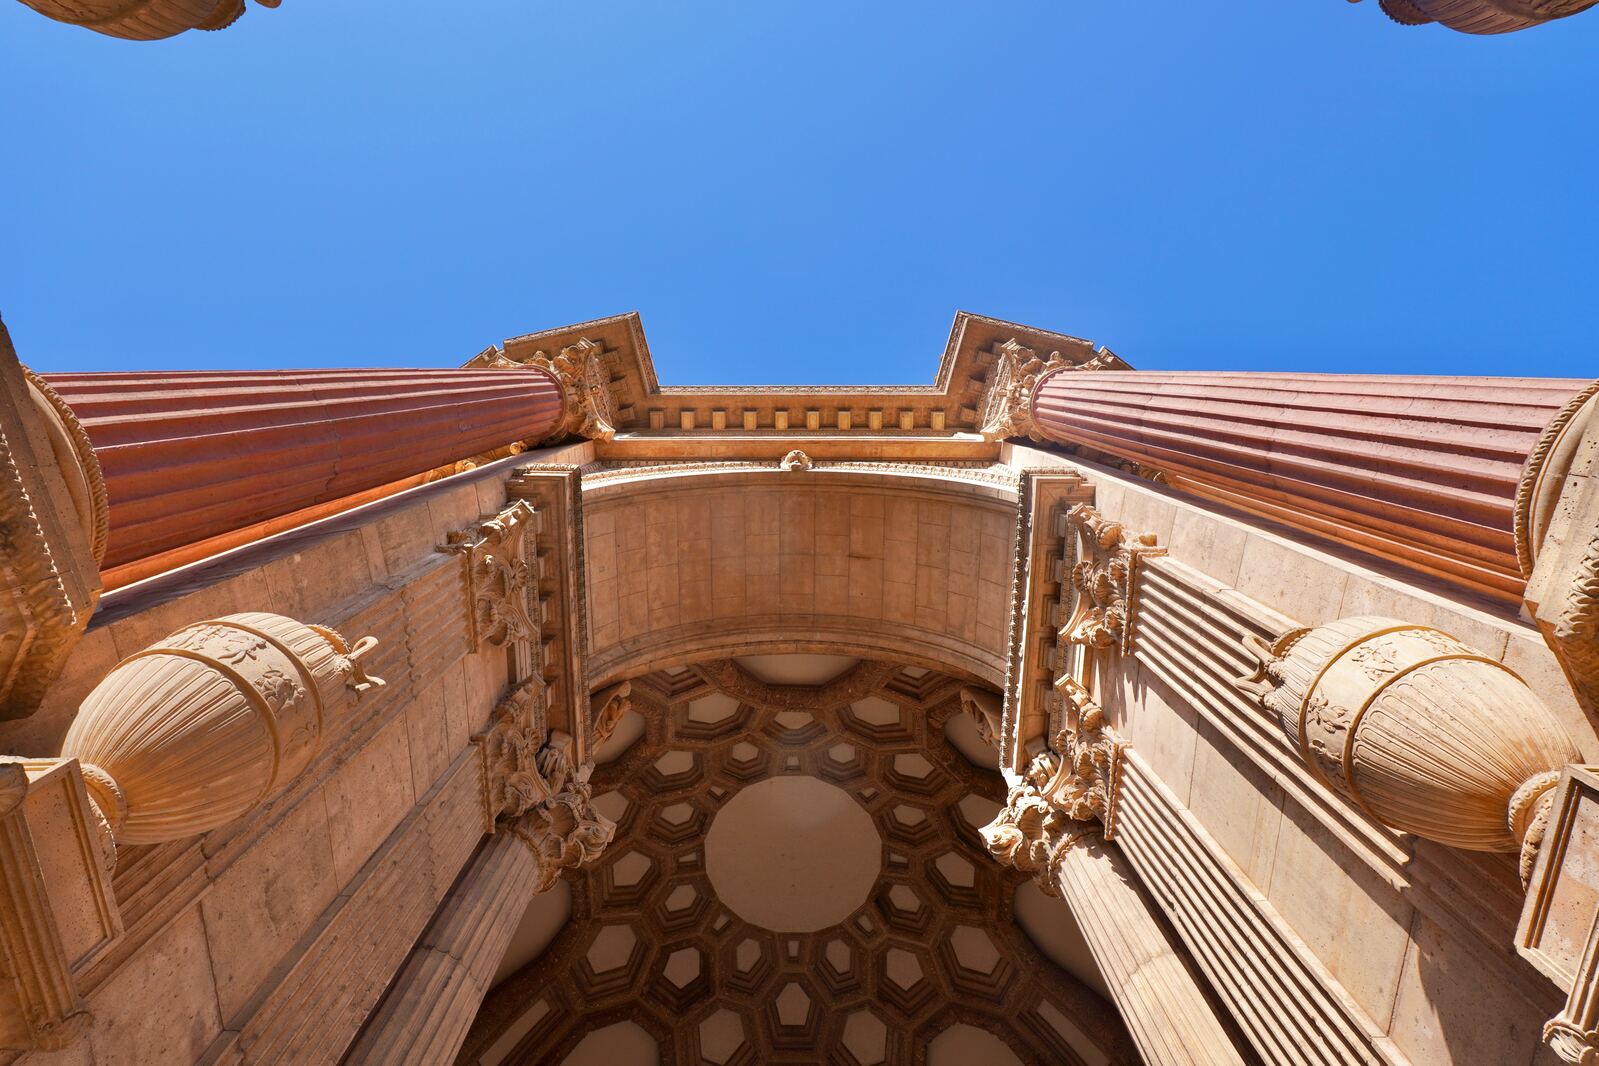 Image of The Palace of Fine Arts by Team PhotoHound